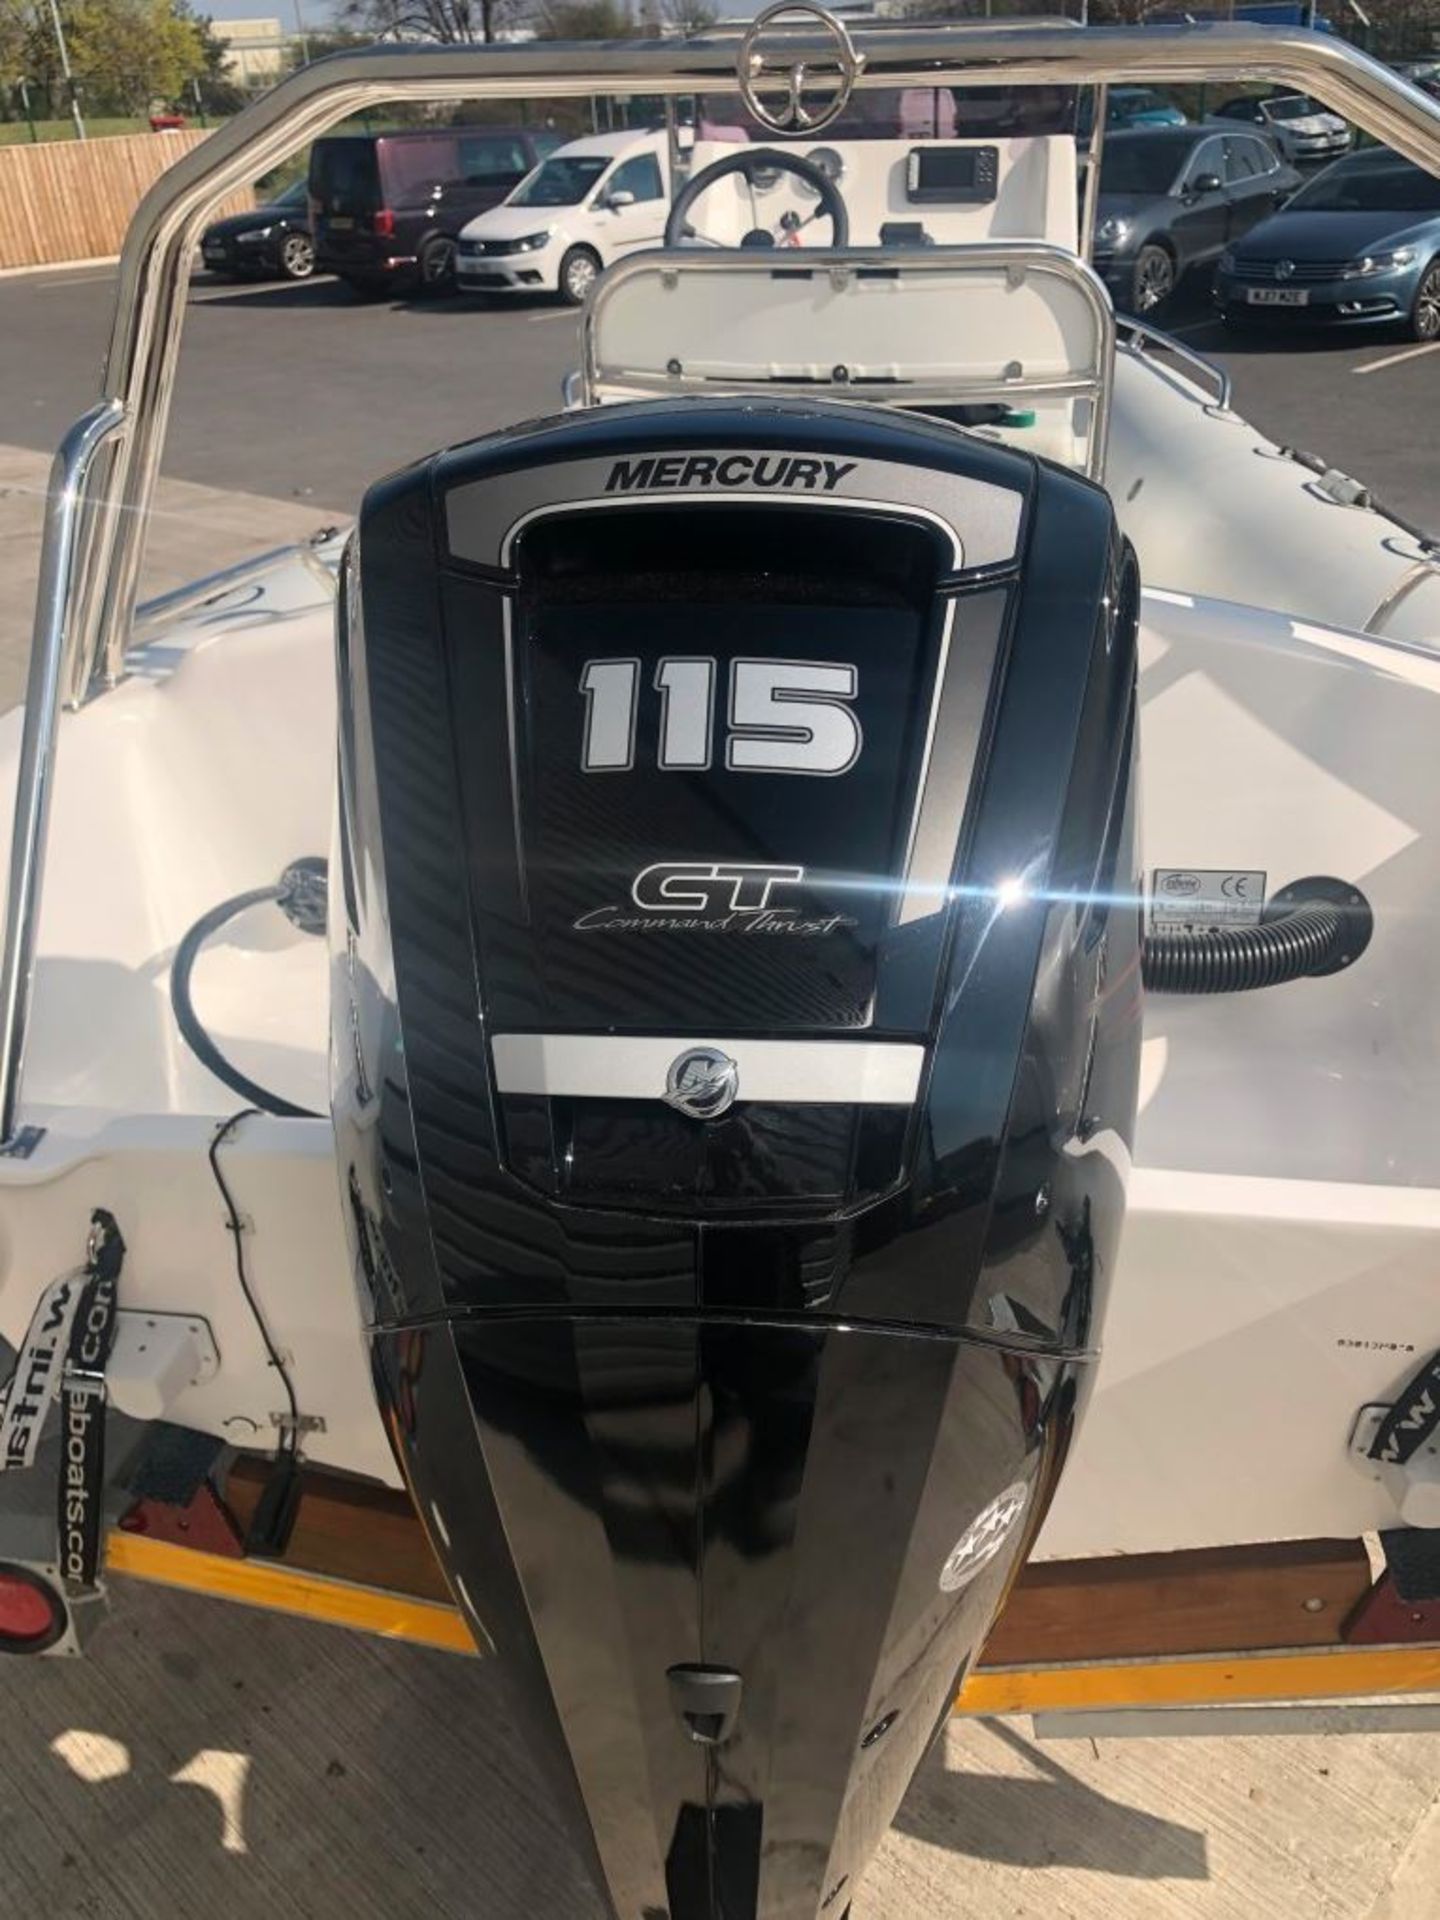 Infanta 5.8LRi Rib Complete With 115hp Mercury 4stroke and Trailer - Image 5 of 17